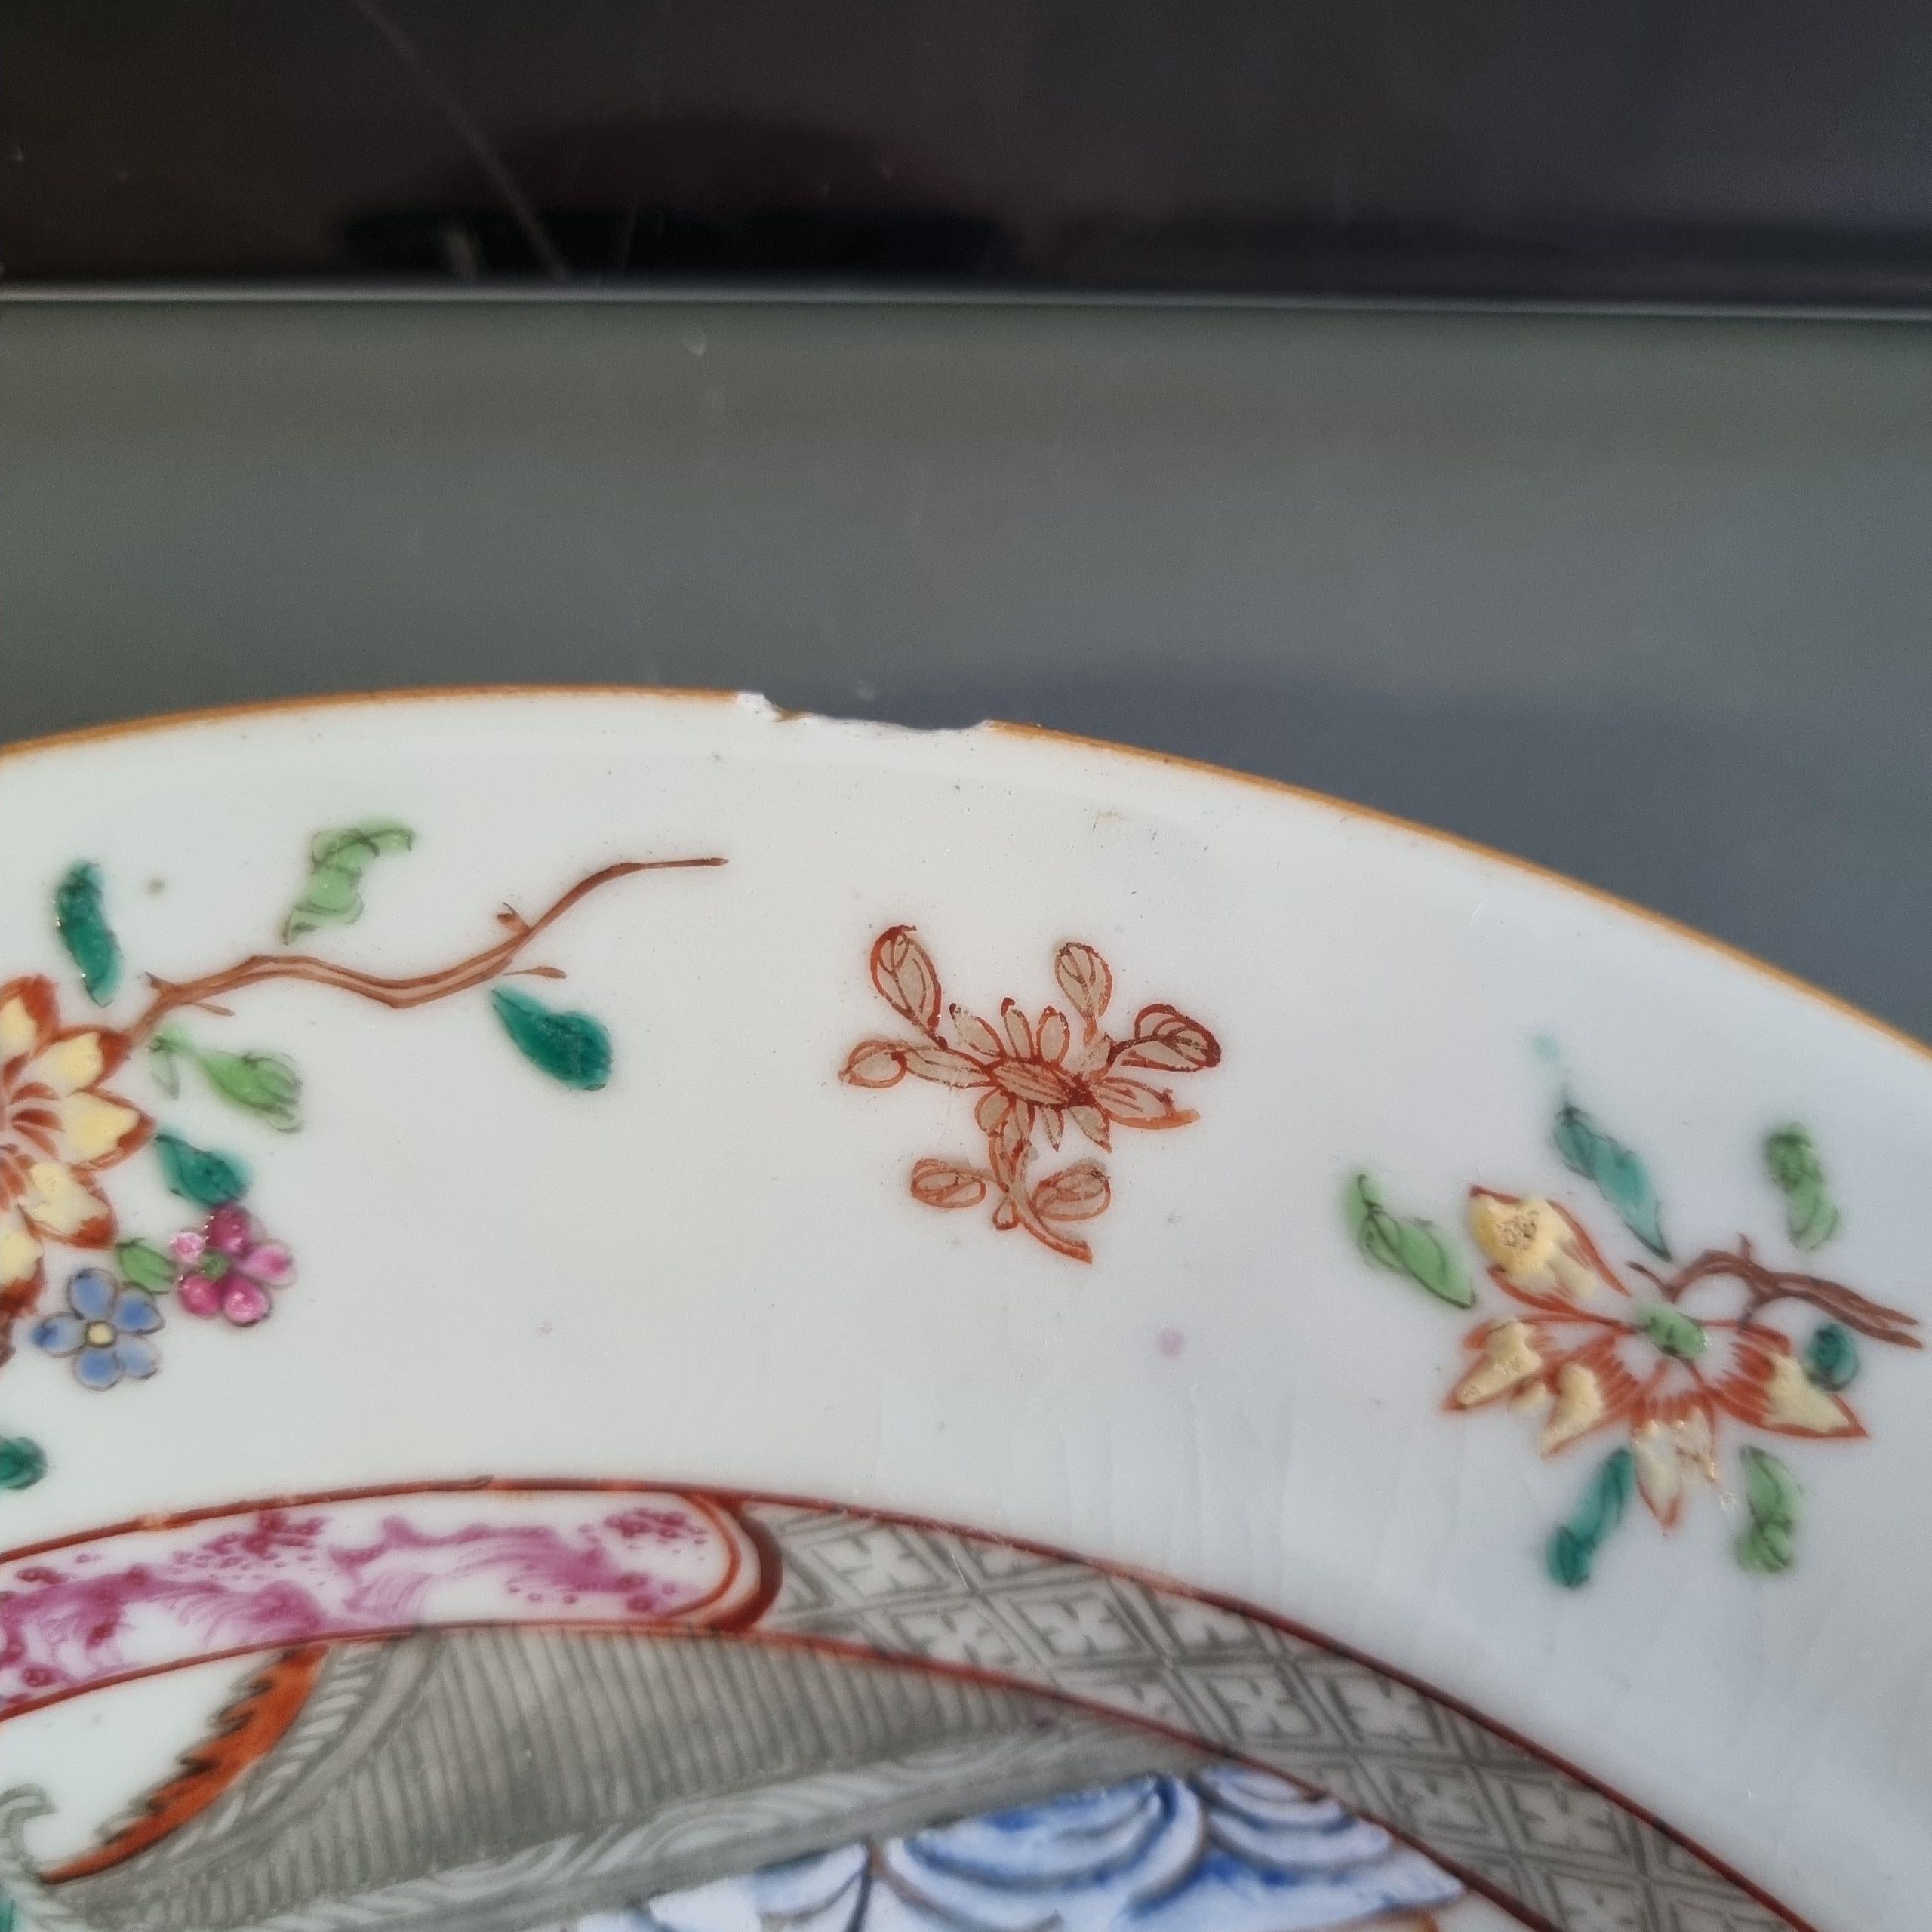 Sharing with you this lovely dish from the 18th century, Yongzheng or early Qianlong period. Unusual decoration.
Still researching the scene.

Condition
1 fritspot to rim and minimal fleebites to rim. Size 226x27mm DiameterxHeight
Period
18th